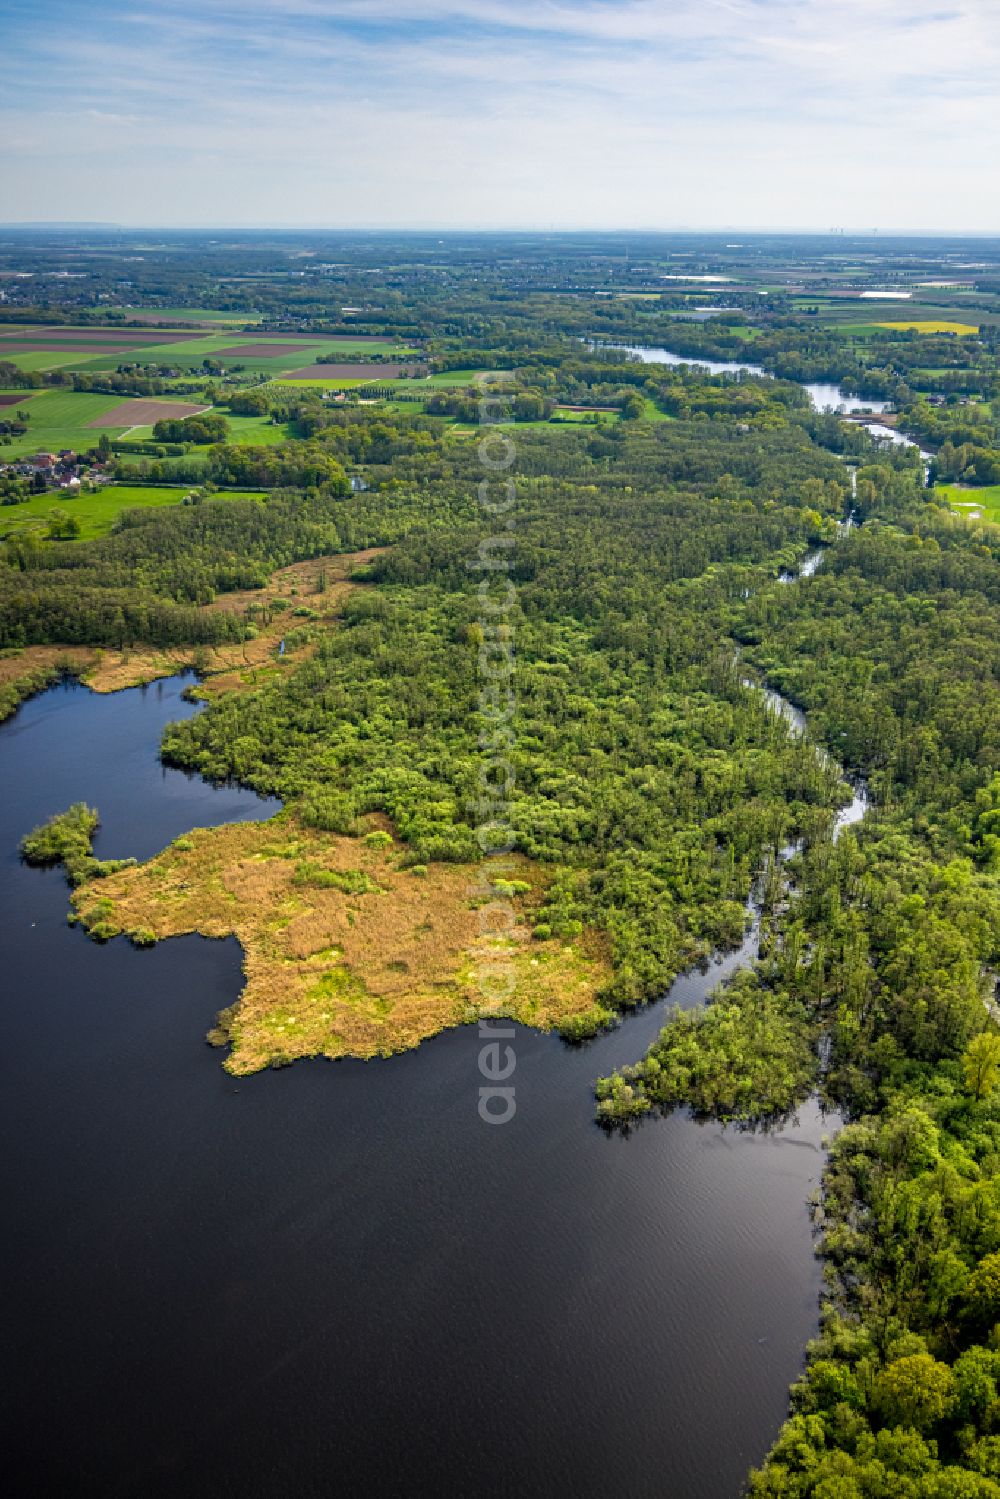 Nettetal from above - Shoreline landscape in the area of the chain of lakes Grosser De Wittsee - Krickenbecker Seen on the road Am Wittsee in Nettetal in the federal state of North Rhine-Westphalia, Germany